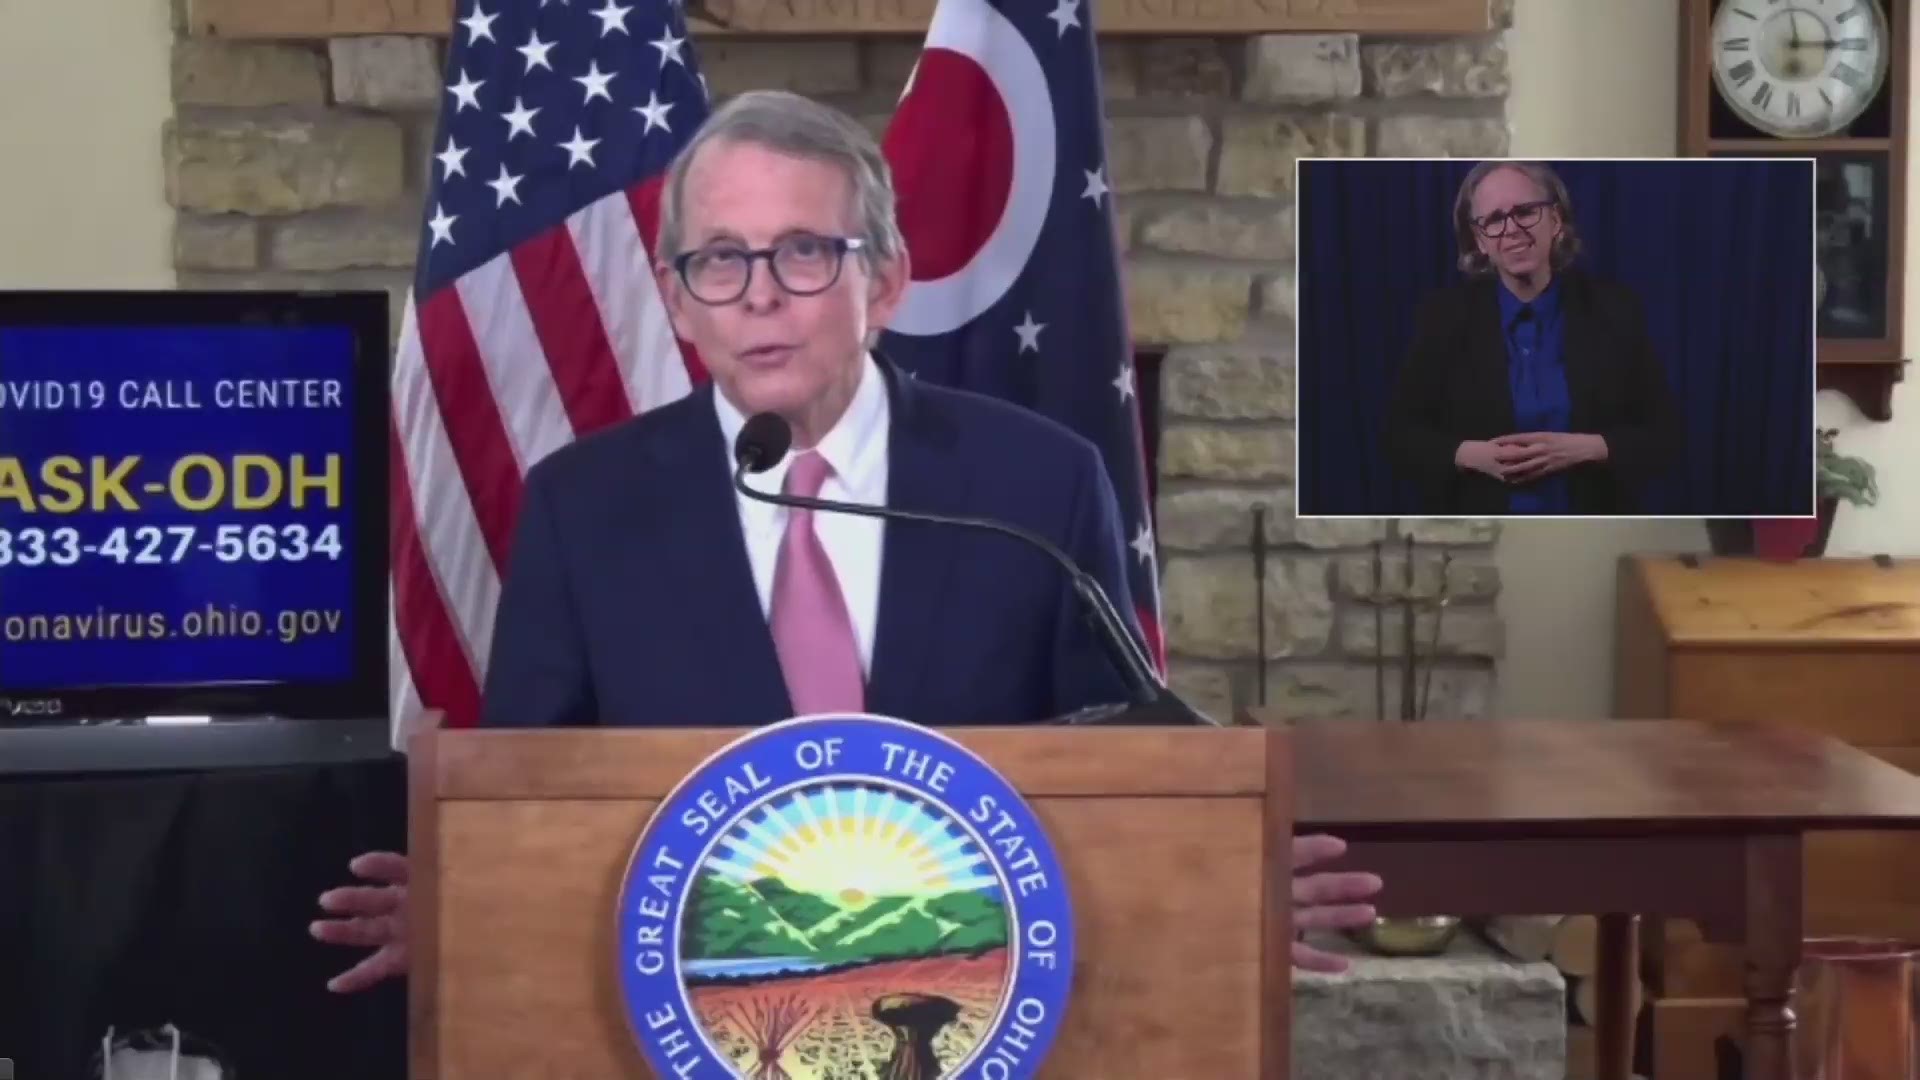 DeWine says he's optimistic.  He spoke directly with Johnson & Johnson and got some good news from them.